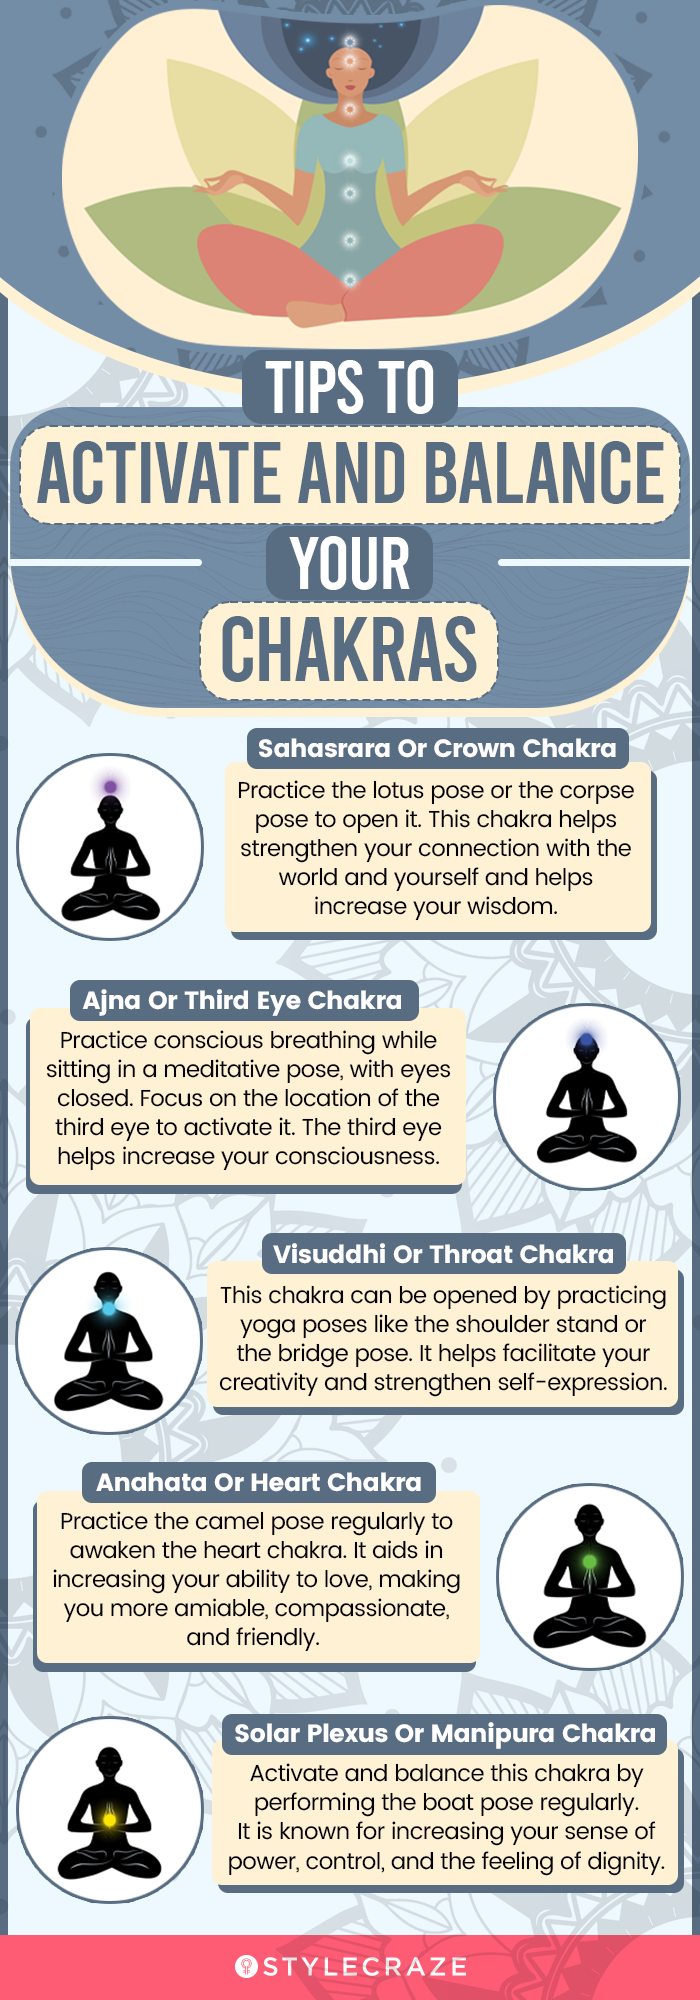 How To Activate Chakras?